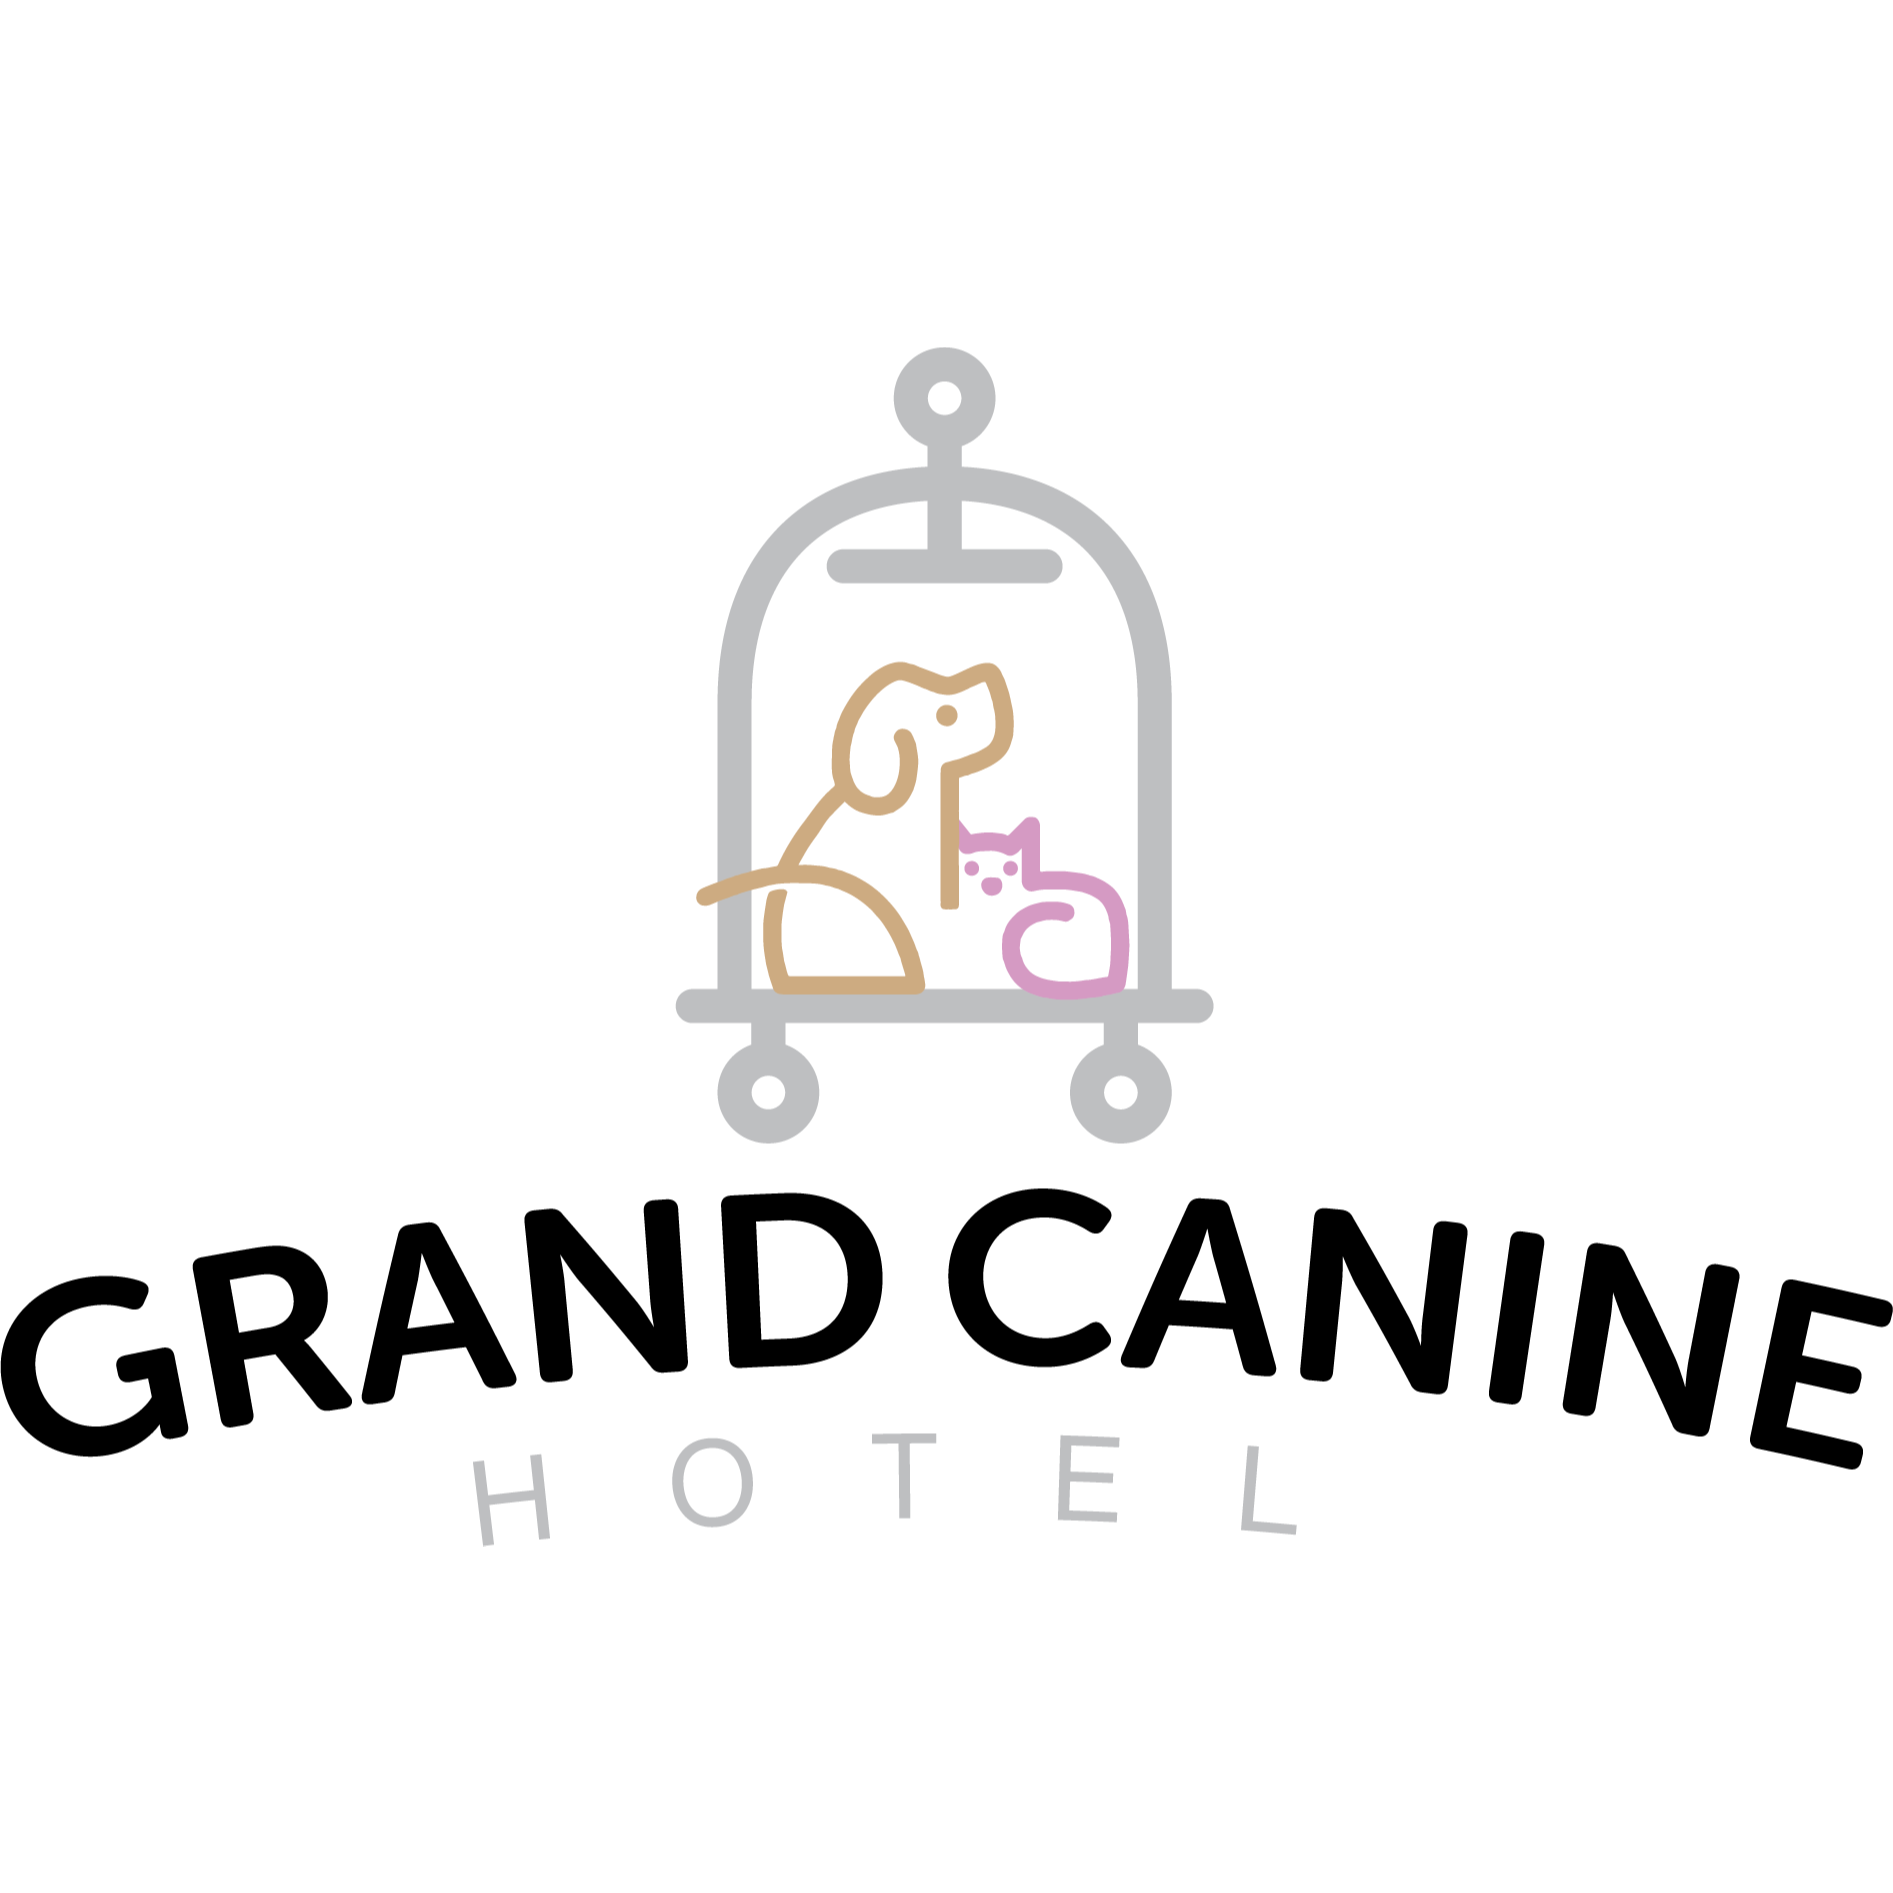 Grand Canine Hotel - Indianapolis, IN 46256 - (317)983-1440 | ShowMeLocal.com